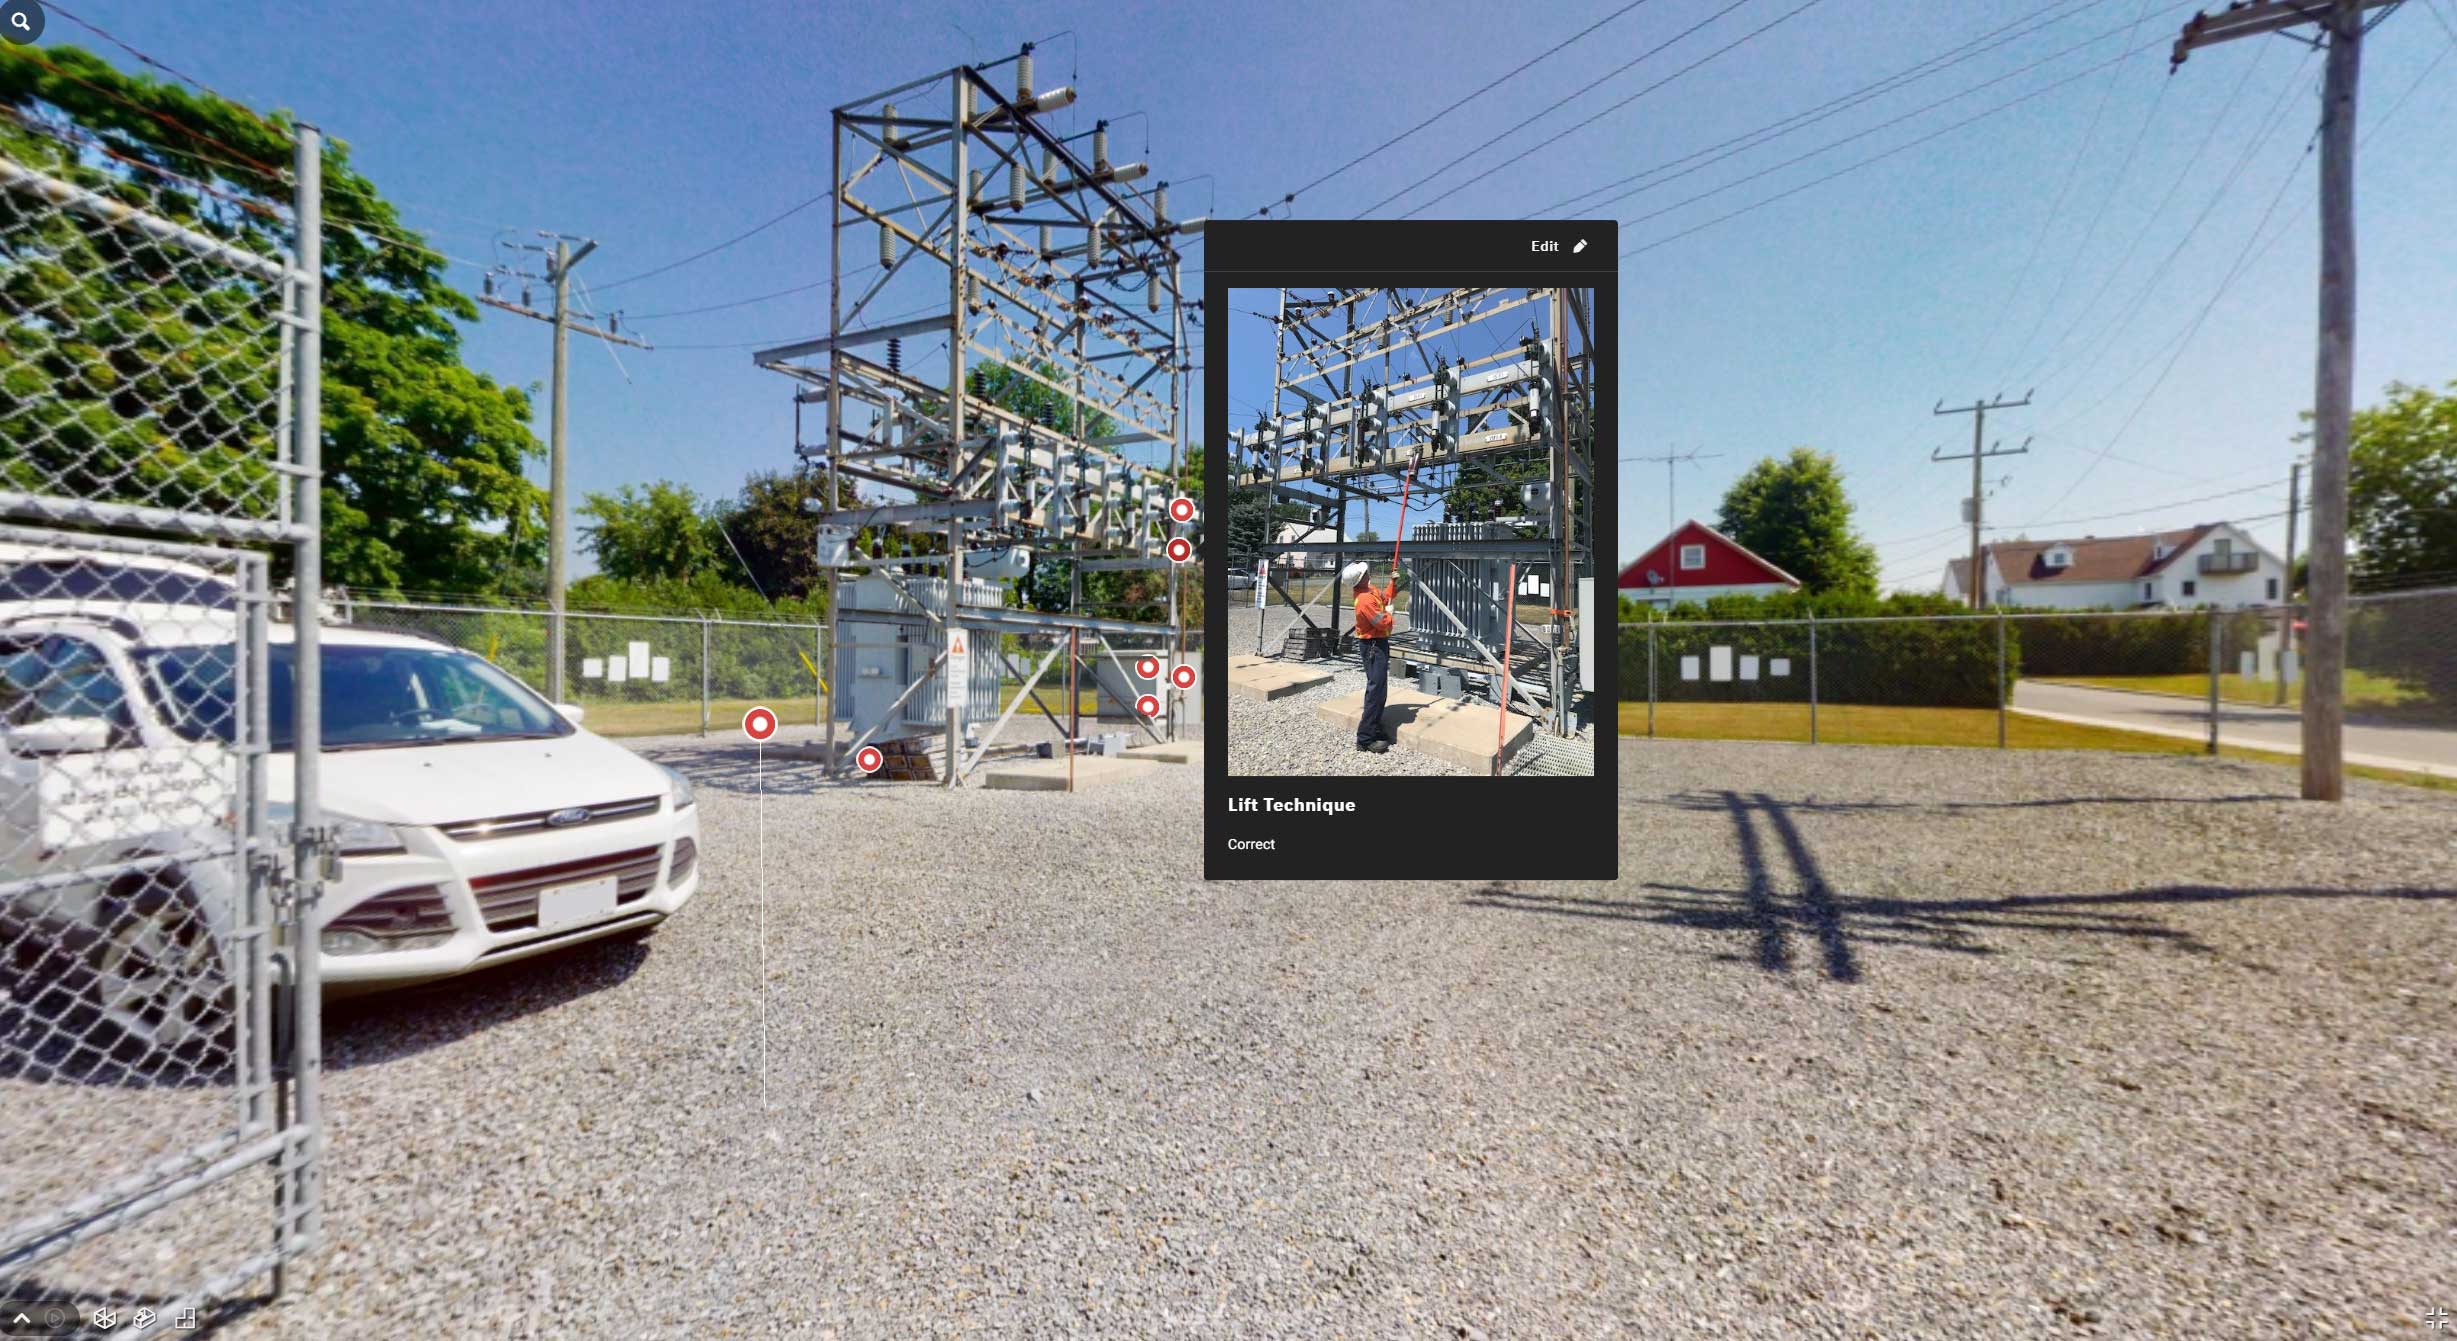 3D Tour and Image for Virtual Training of Distribution Station